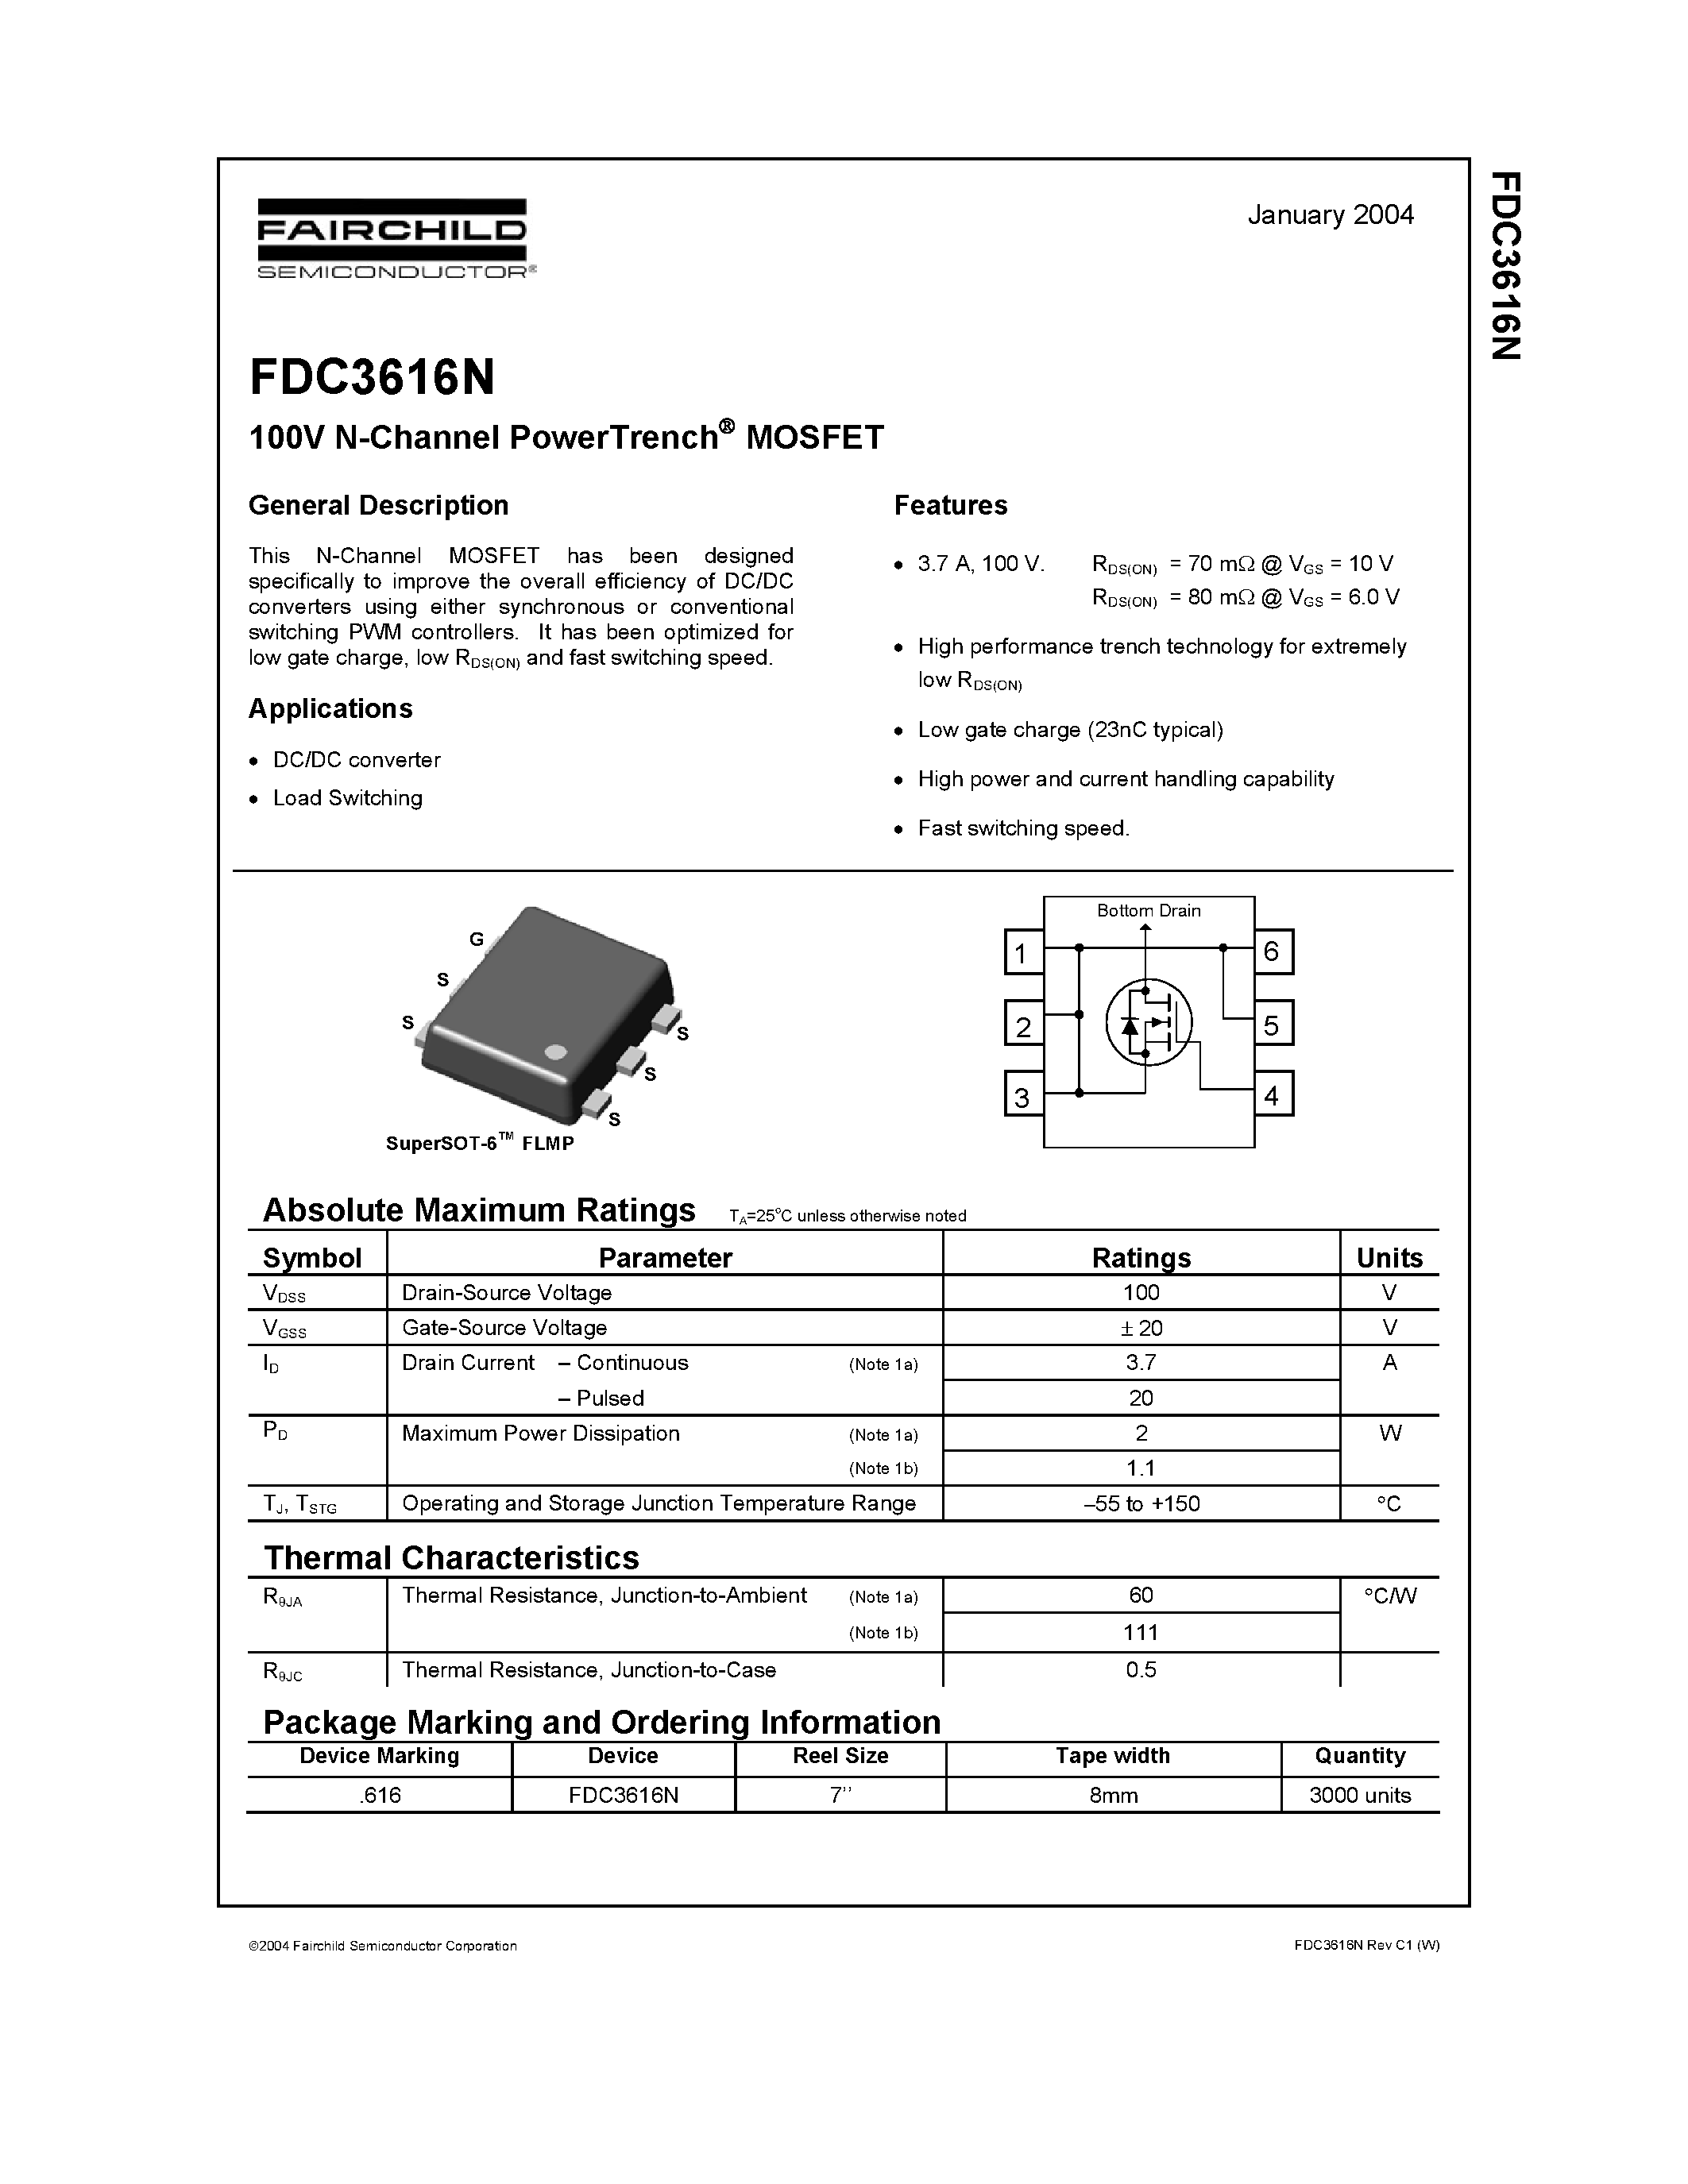 Datasheet FDC3616N - 100V N-Channel PowerTrench MOSFET page 1